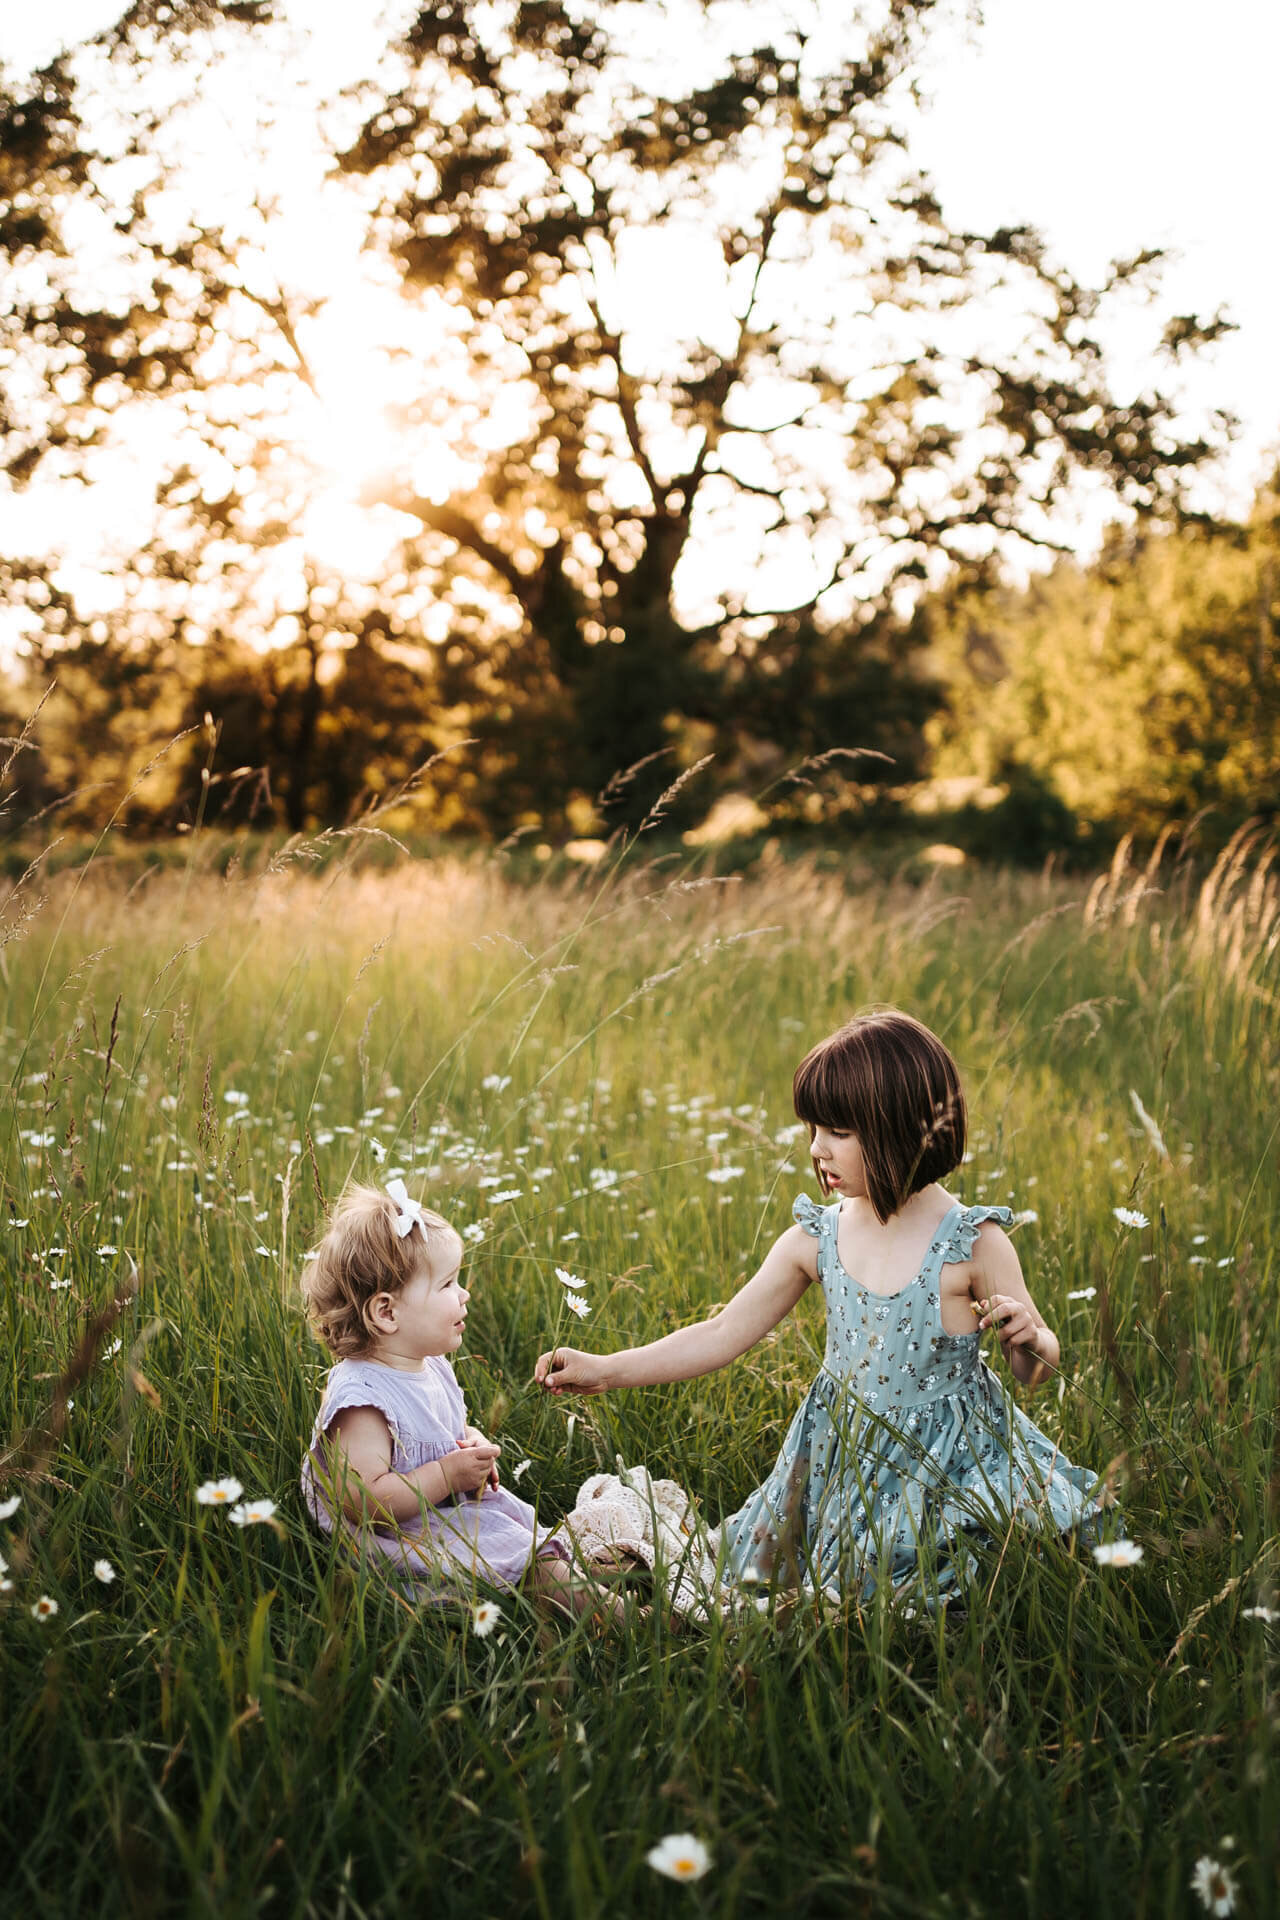 Big sister is giving her toddler sister a daisy in a daisy field